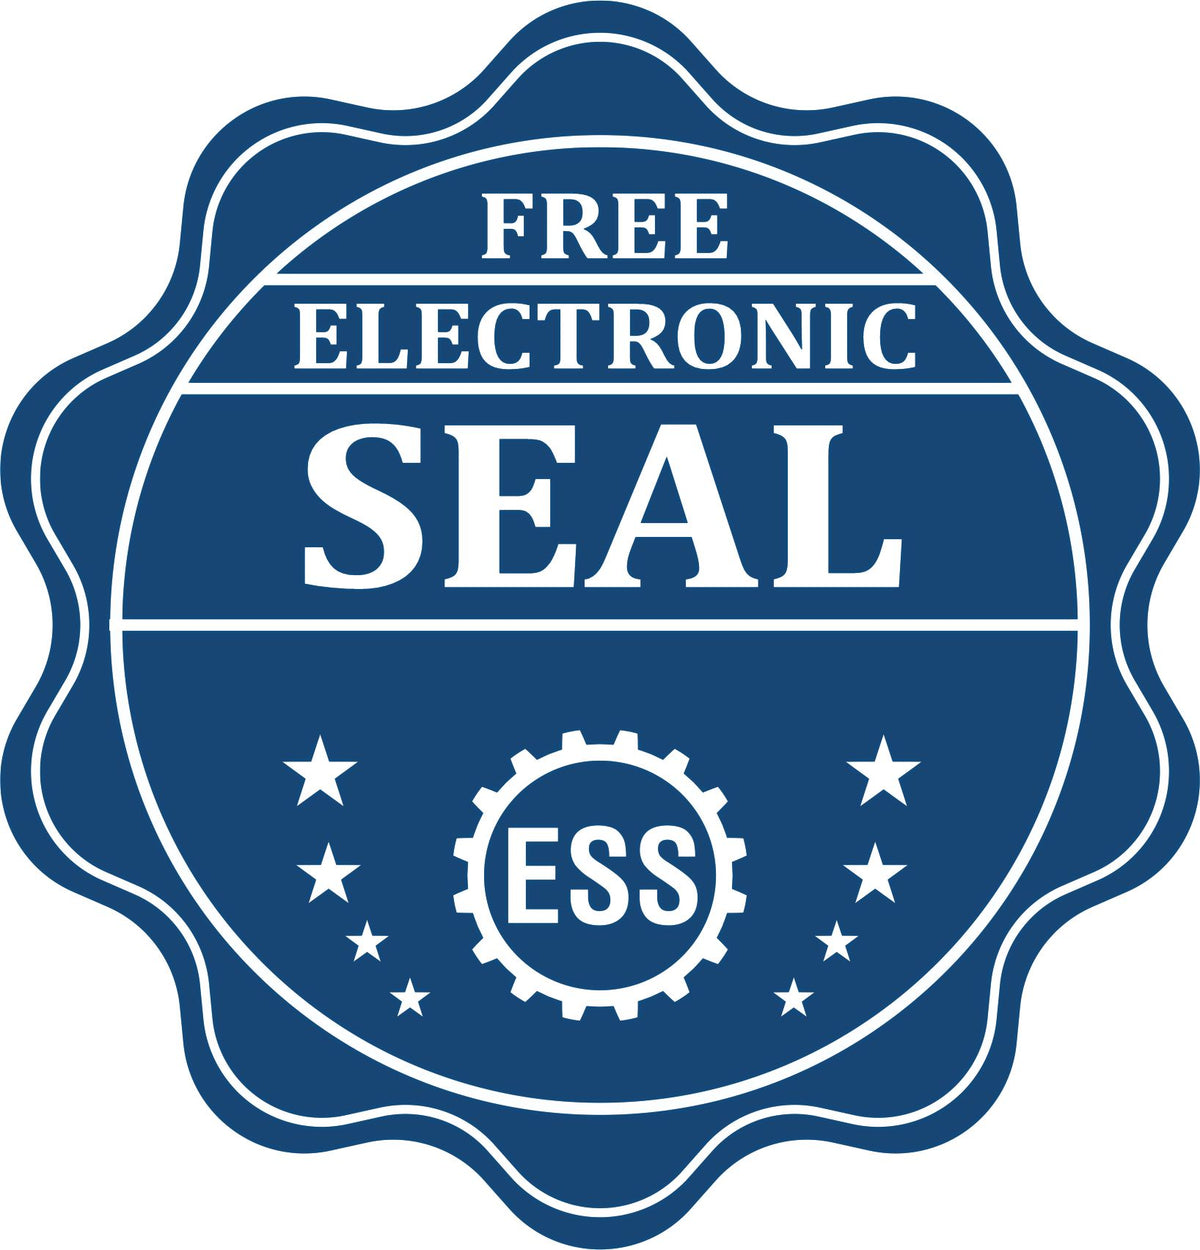 A badge showing a free electronic seal for the Gift Nebraska Engineer Seal with stars and the ESS gear on the emblem.